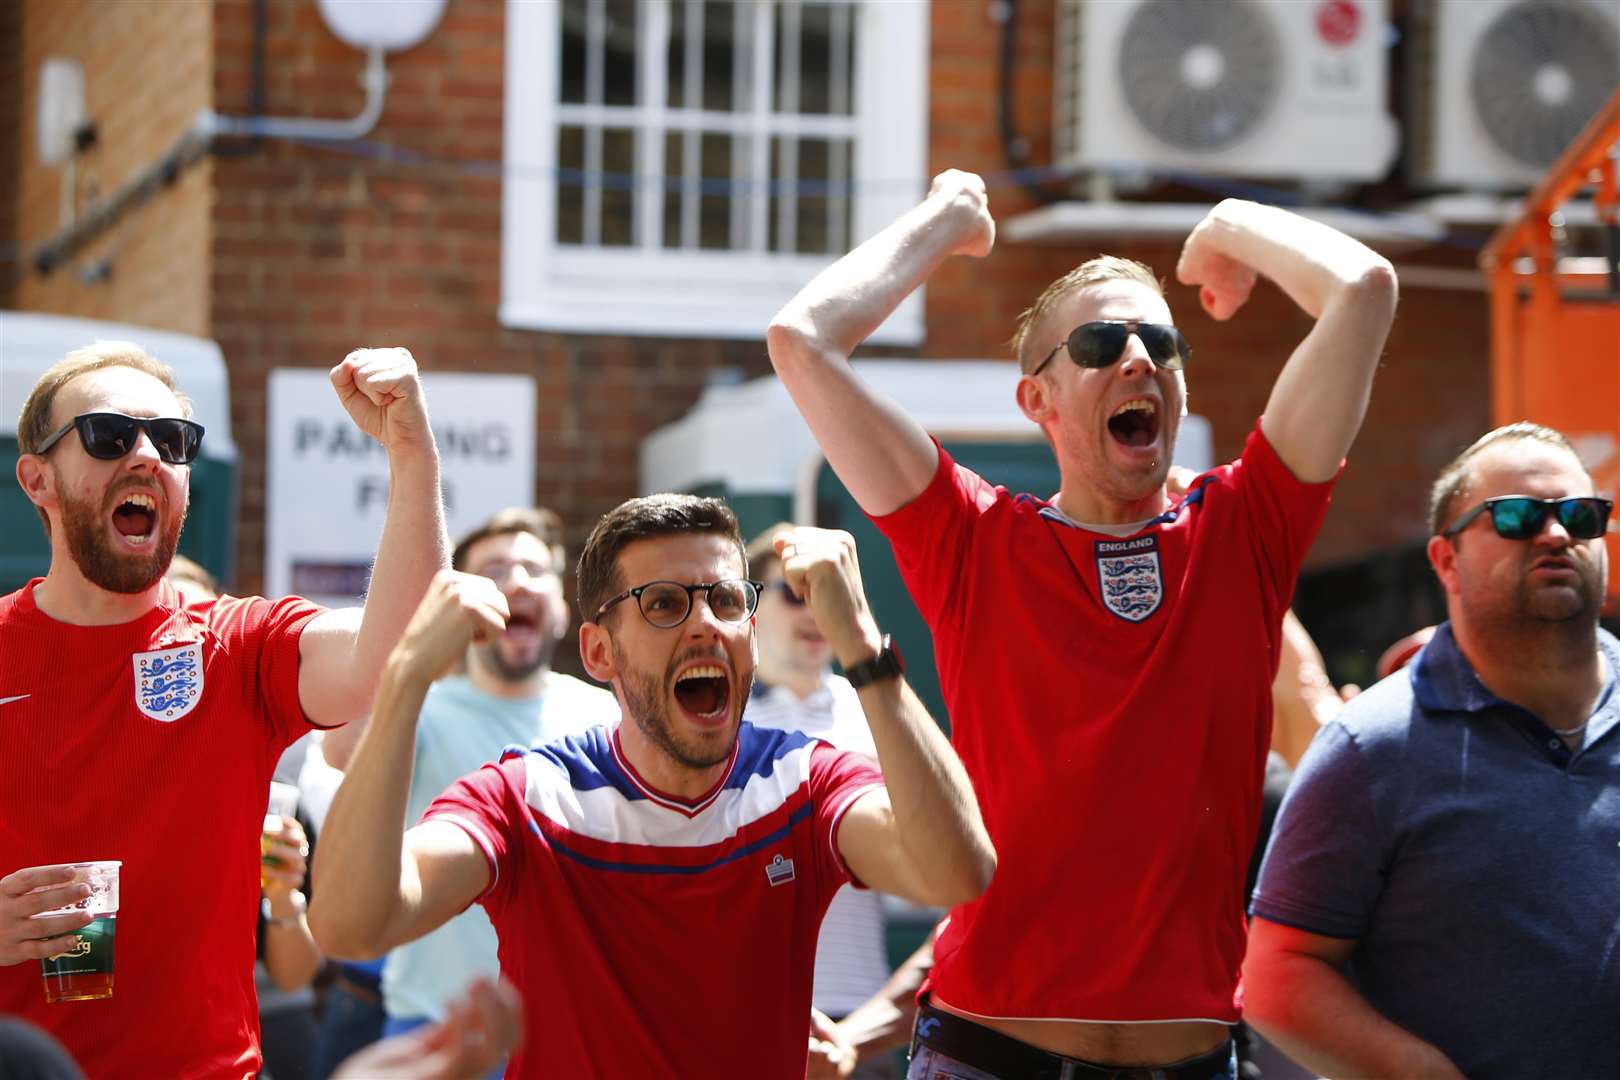 Fans at the now infamous England v Panama match at the Source Bar, Maidstone